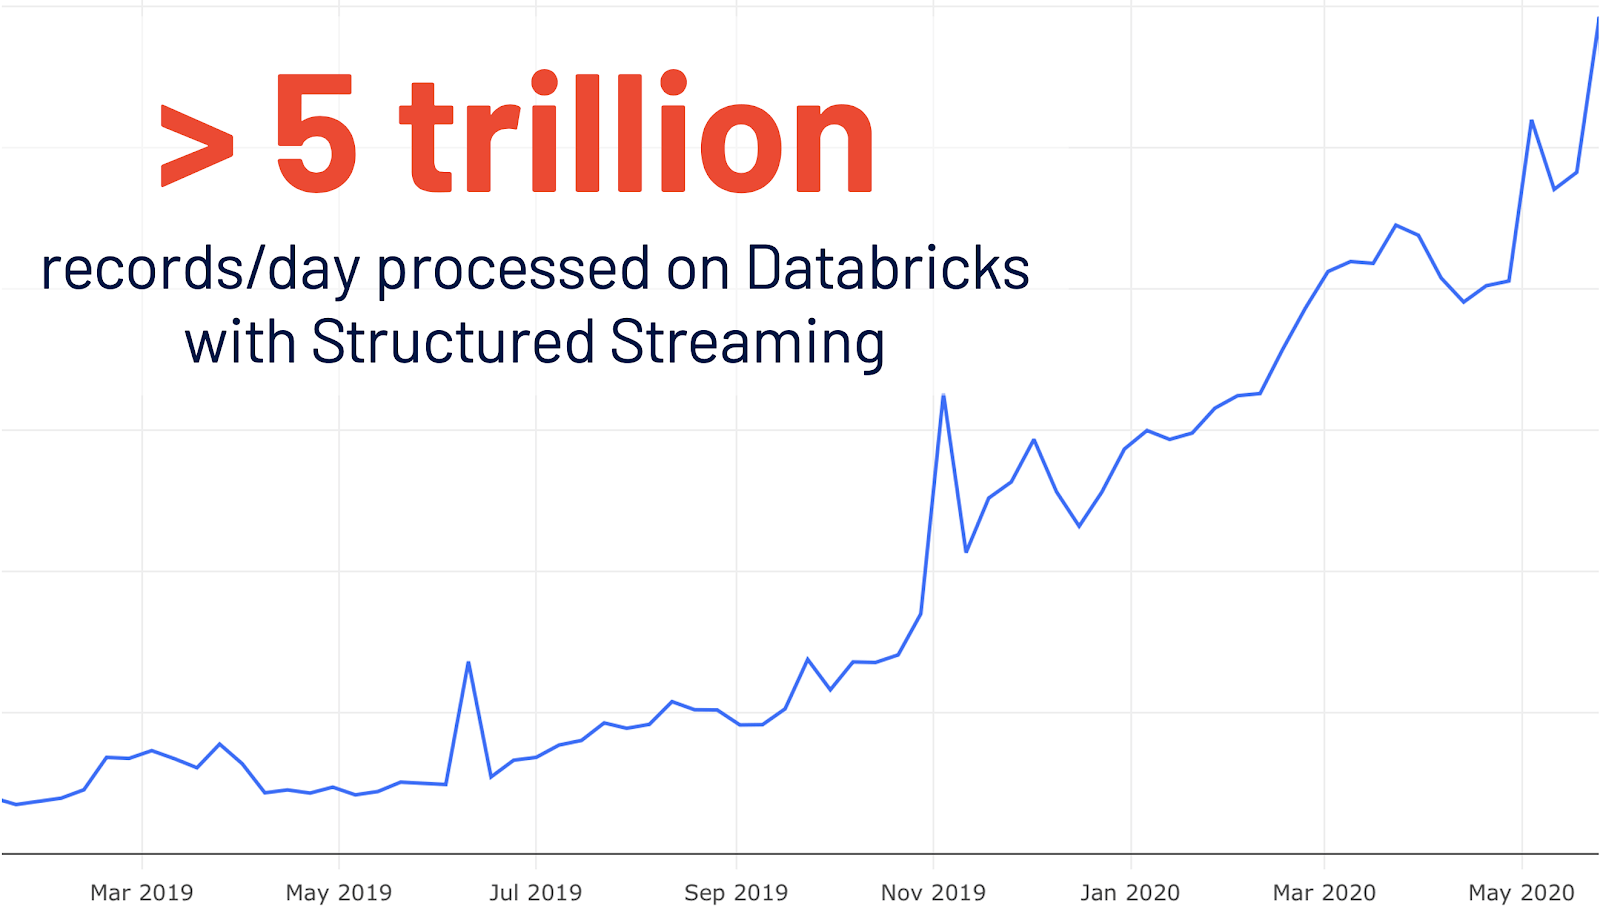 Trend in the number of records processed by Structured Streaming on Databricks